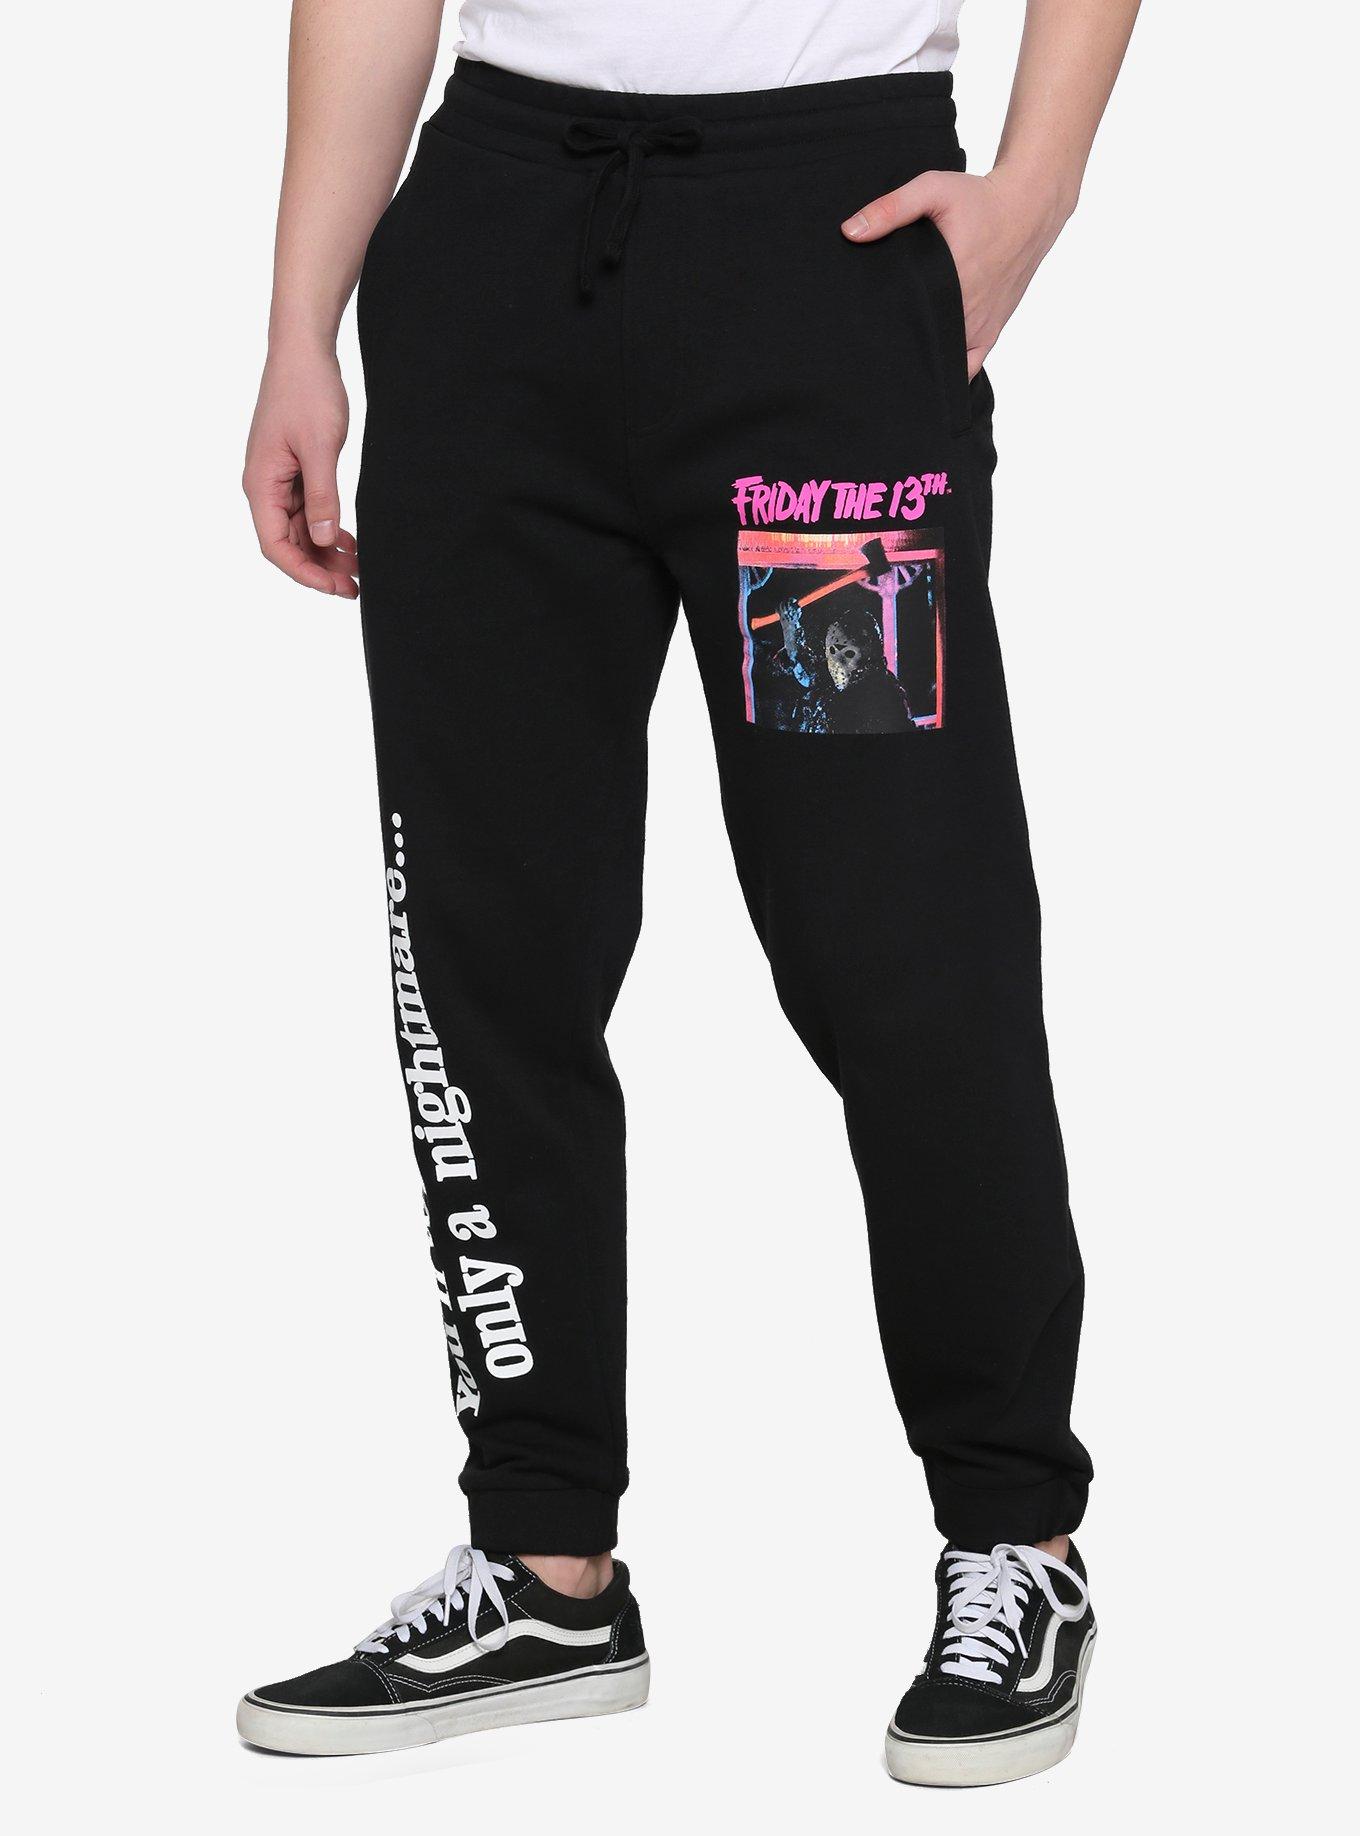 Friday The 13th You'll Wish It Were Only A Nightmare Sweatpants, MULTI, hi-res